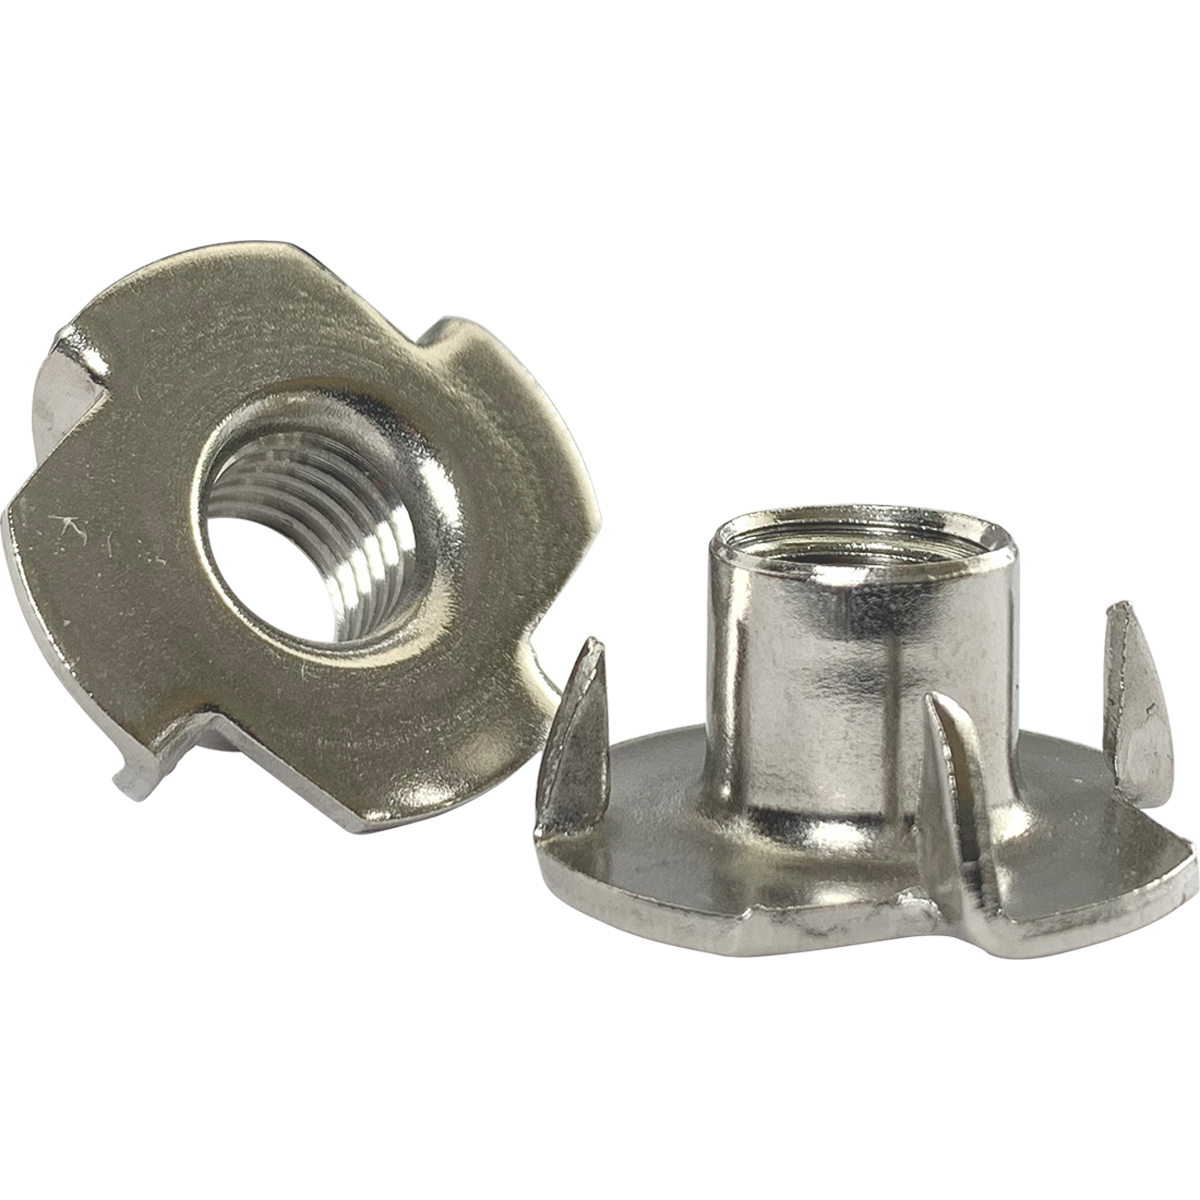 Corrosion resistant A2 stainless steel Tee Nuts, also known as T nuts, 4-pronged t-nuts or tee nuts are available in a selection of sizes at Fusion Fixings